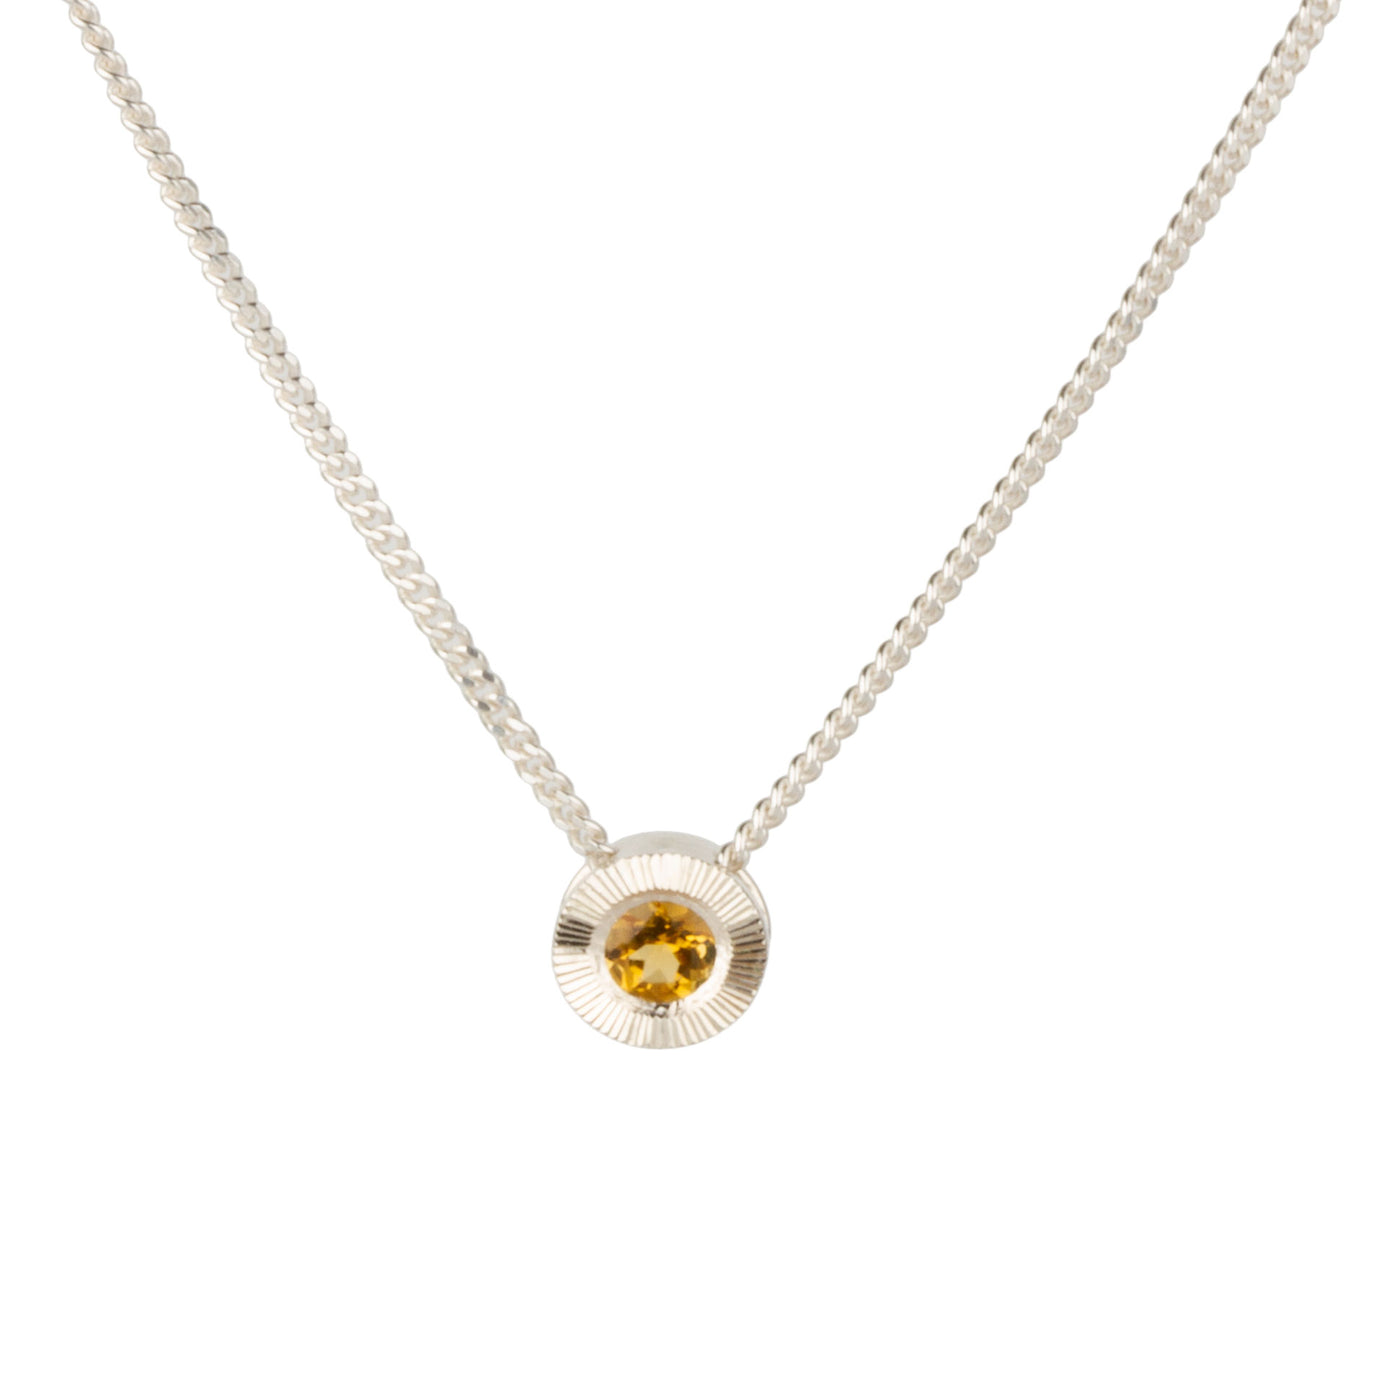 Citrine aurora necklace in silver on white background, front angle